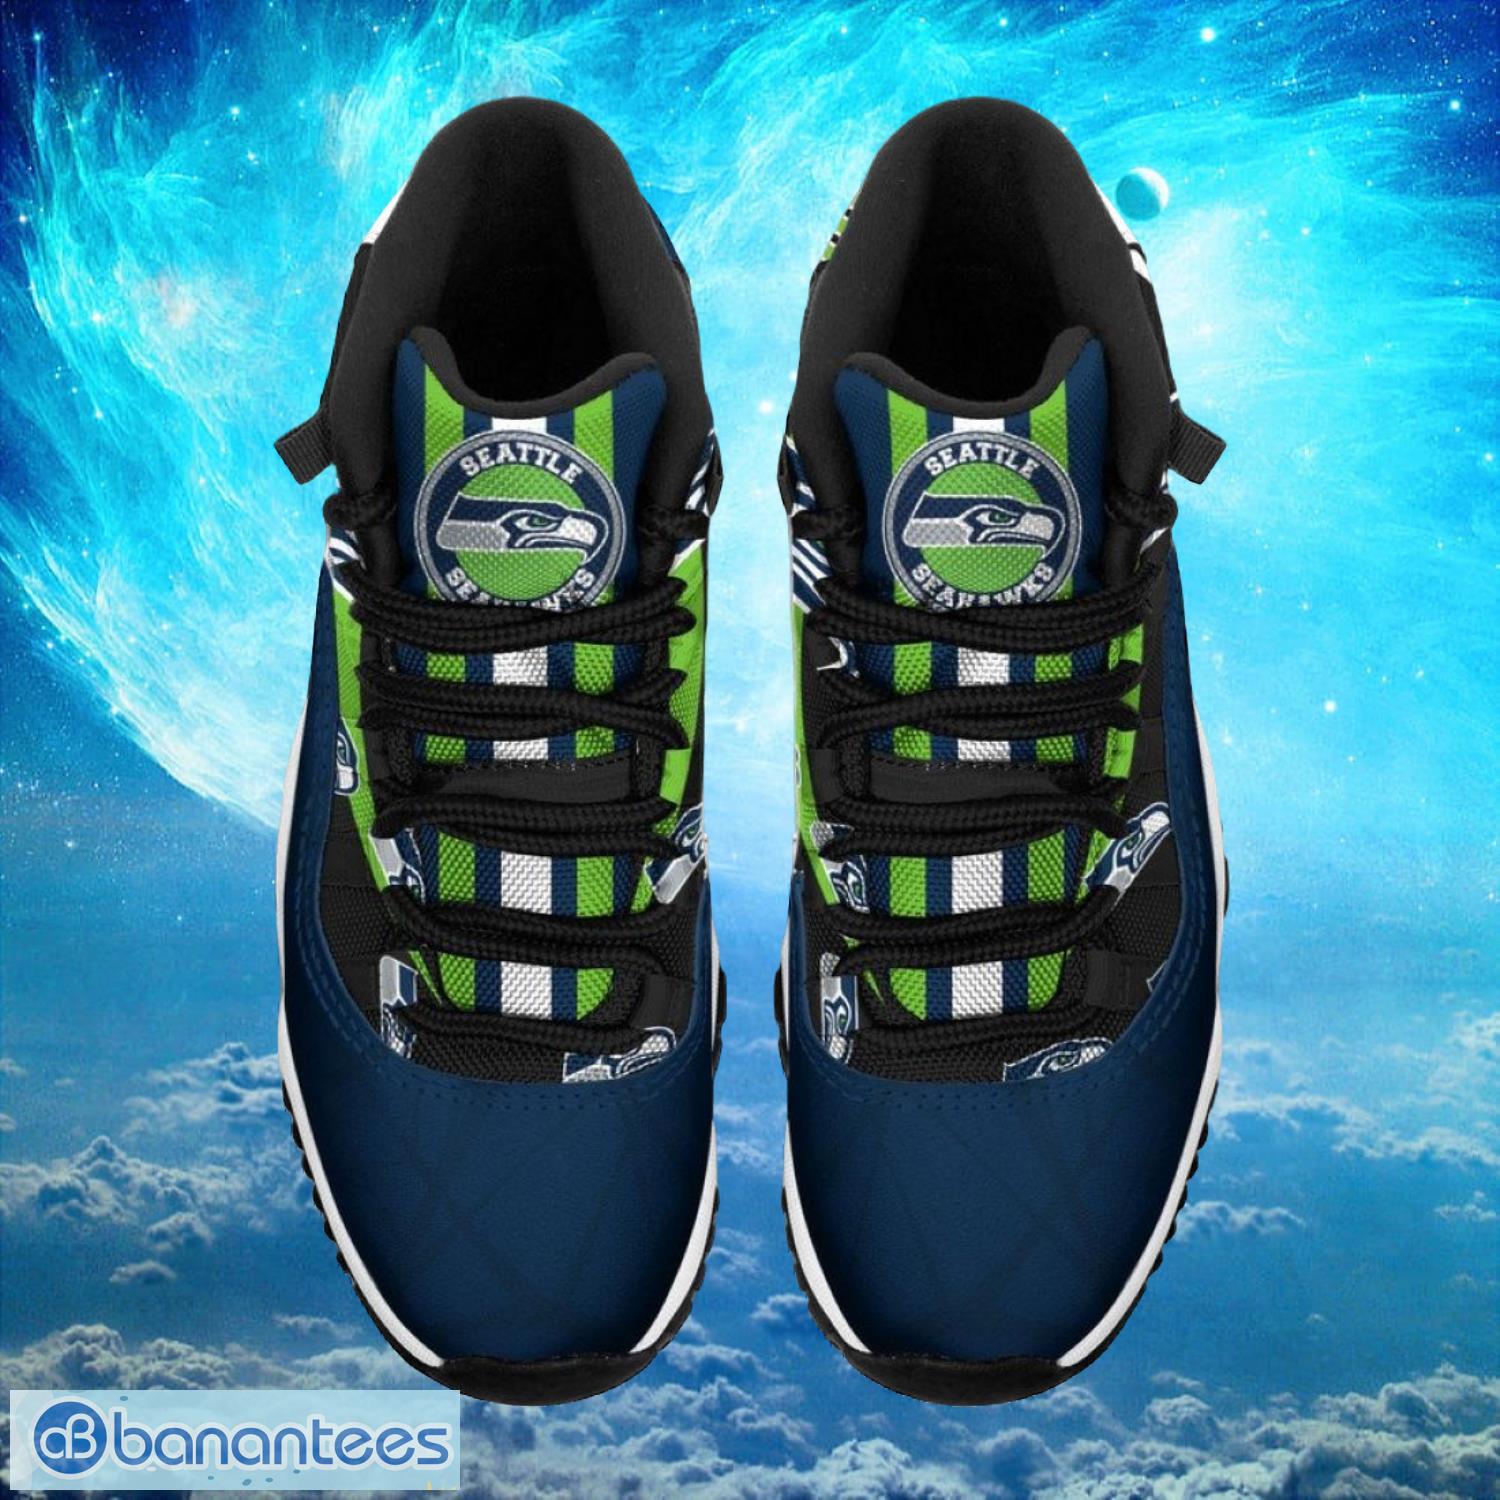 Seattle Seahawks NFL Air Jordan 11 Sneakers Shoes Gift For Fans Product Photo 2